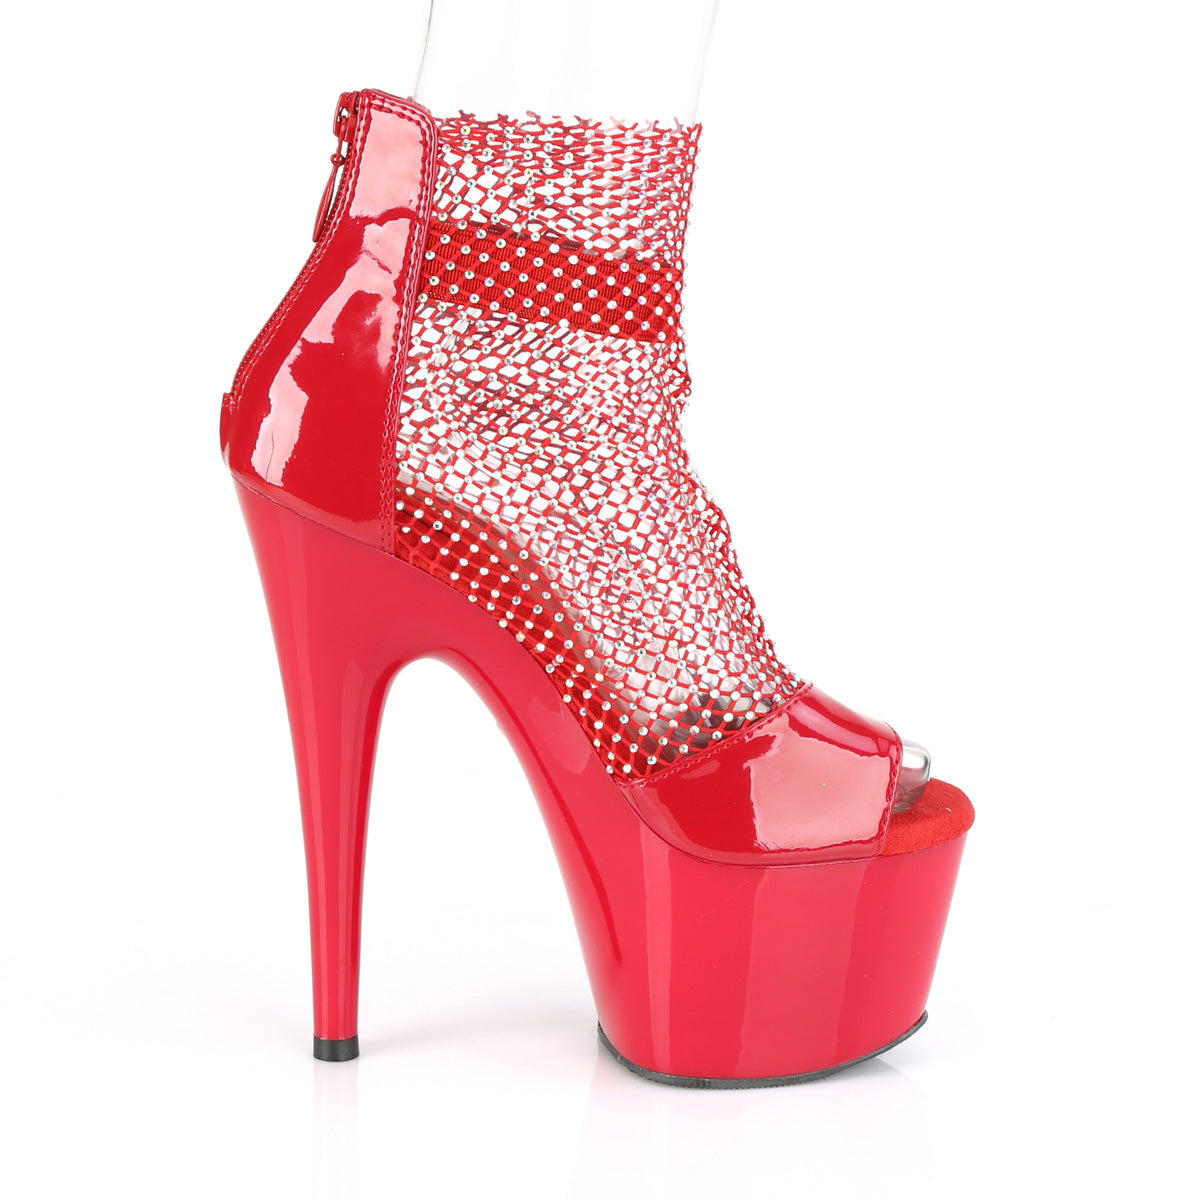 Pleaser Womens Sandals ADORE-765RM Red Pat-RS Mesh/Red